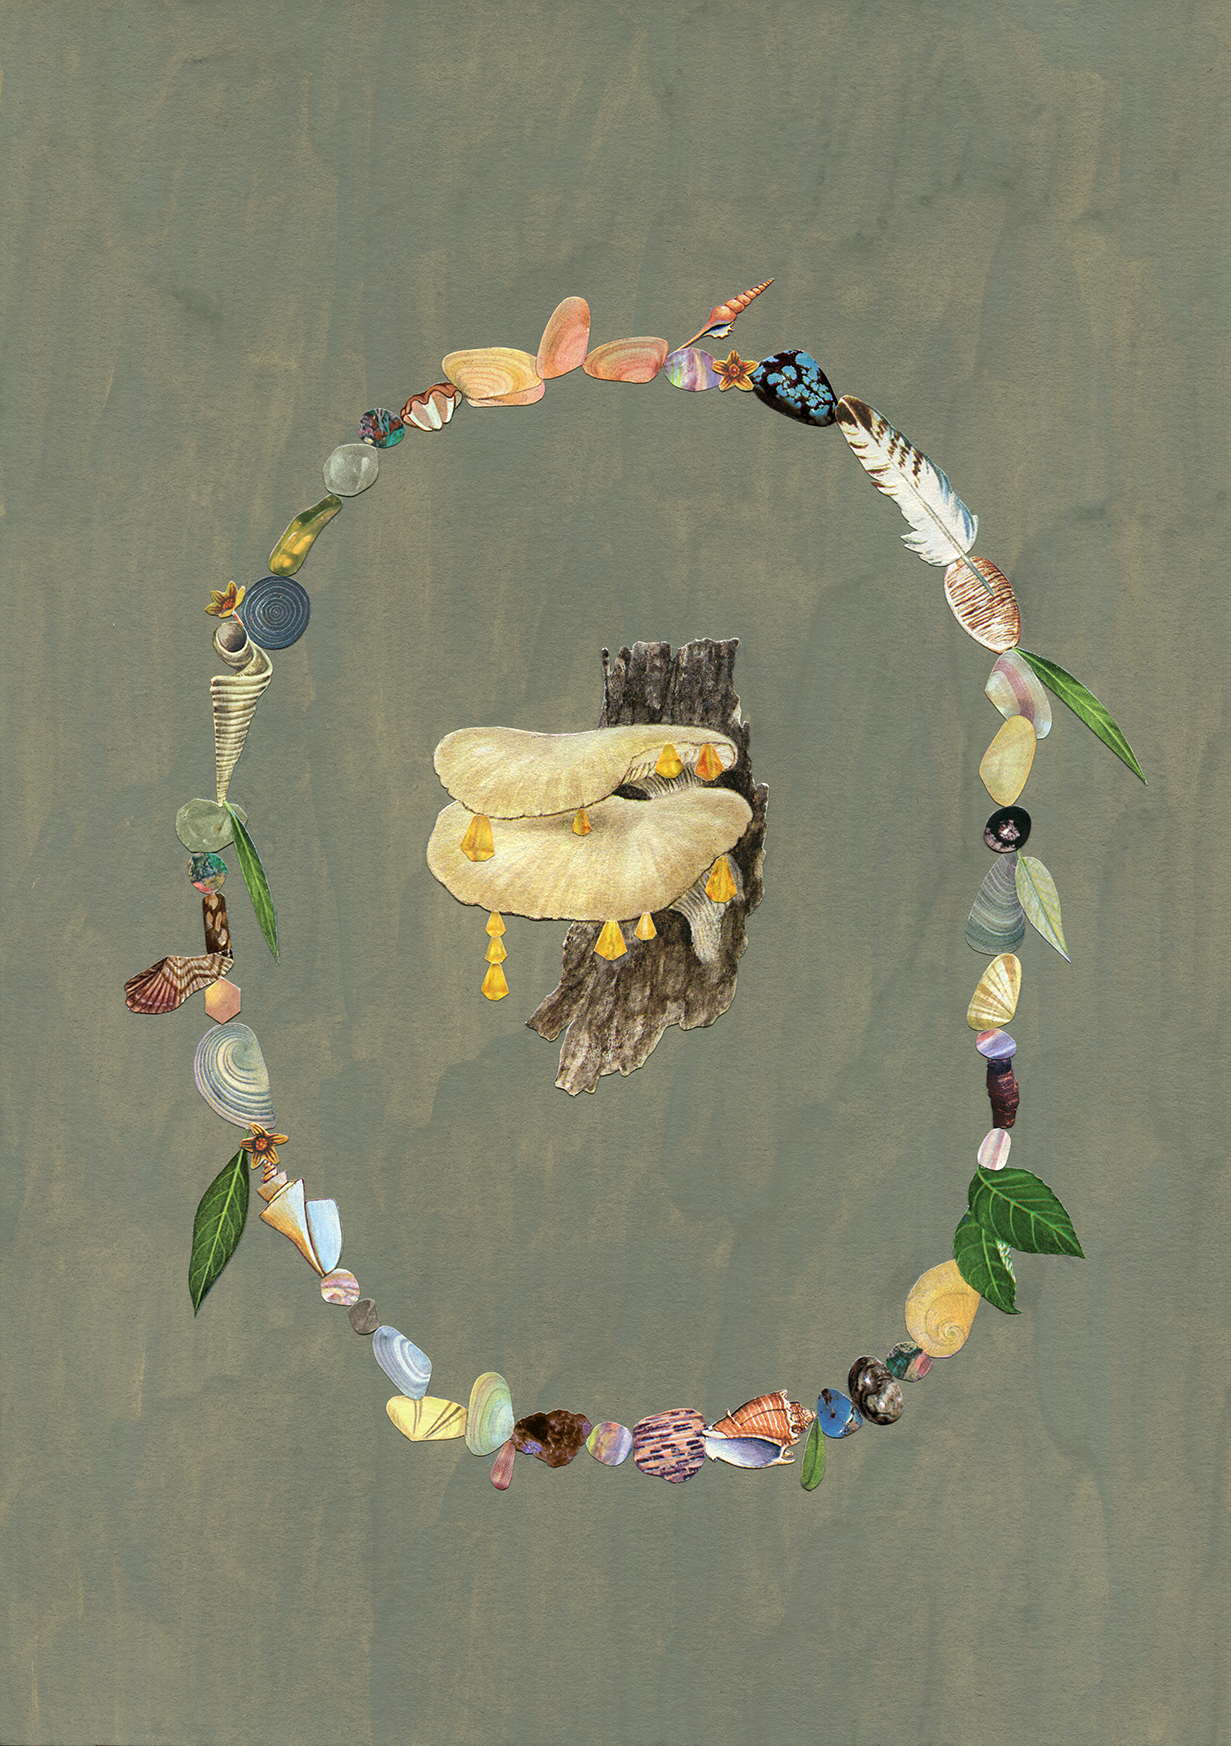 Mushrooms with Beaded Necklace # 2, 2020, collage, found paper, acrylic gouache, 210mm x 297mm